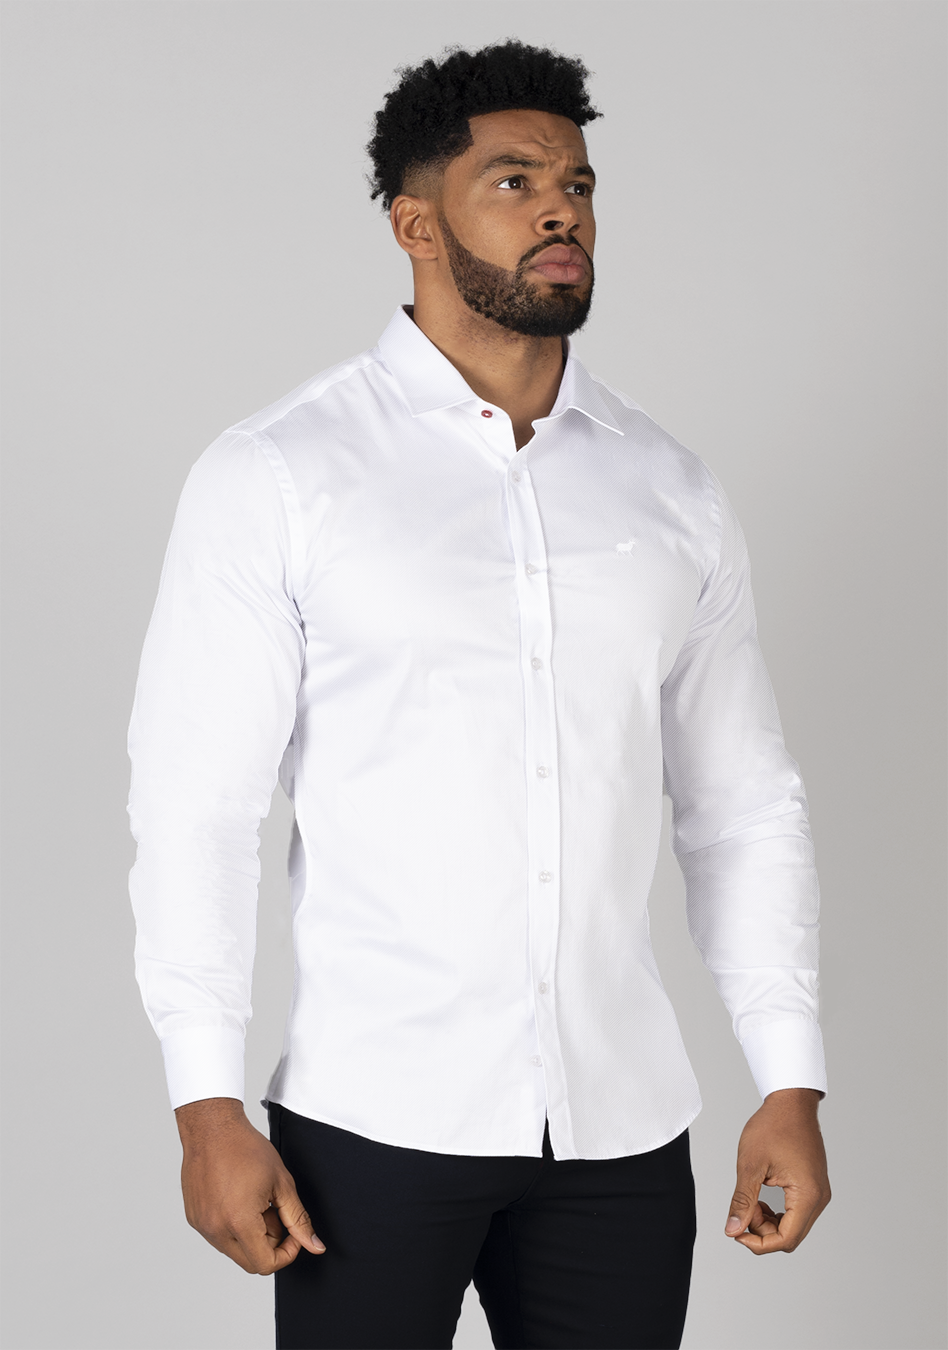 White muscle fit shirt on an athletically built model, showcasing the athletic fit design that enhances physique, with stretch fabric for comfort and mobility